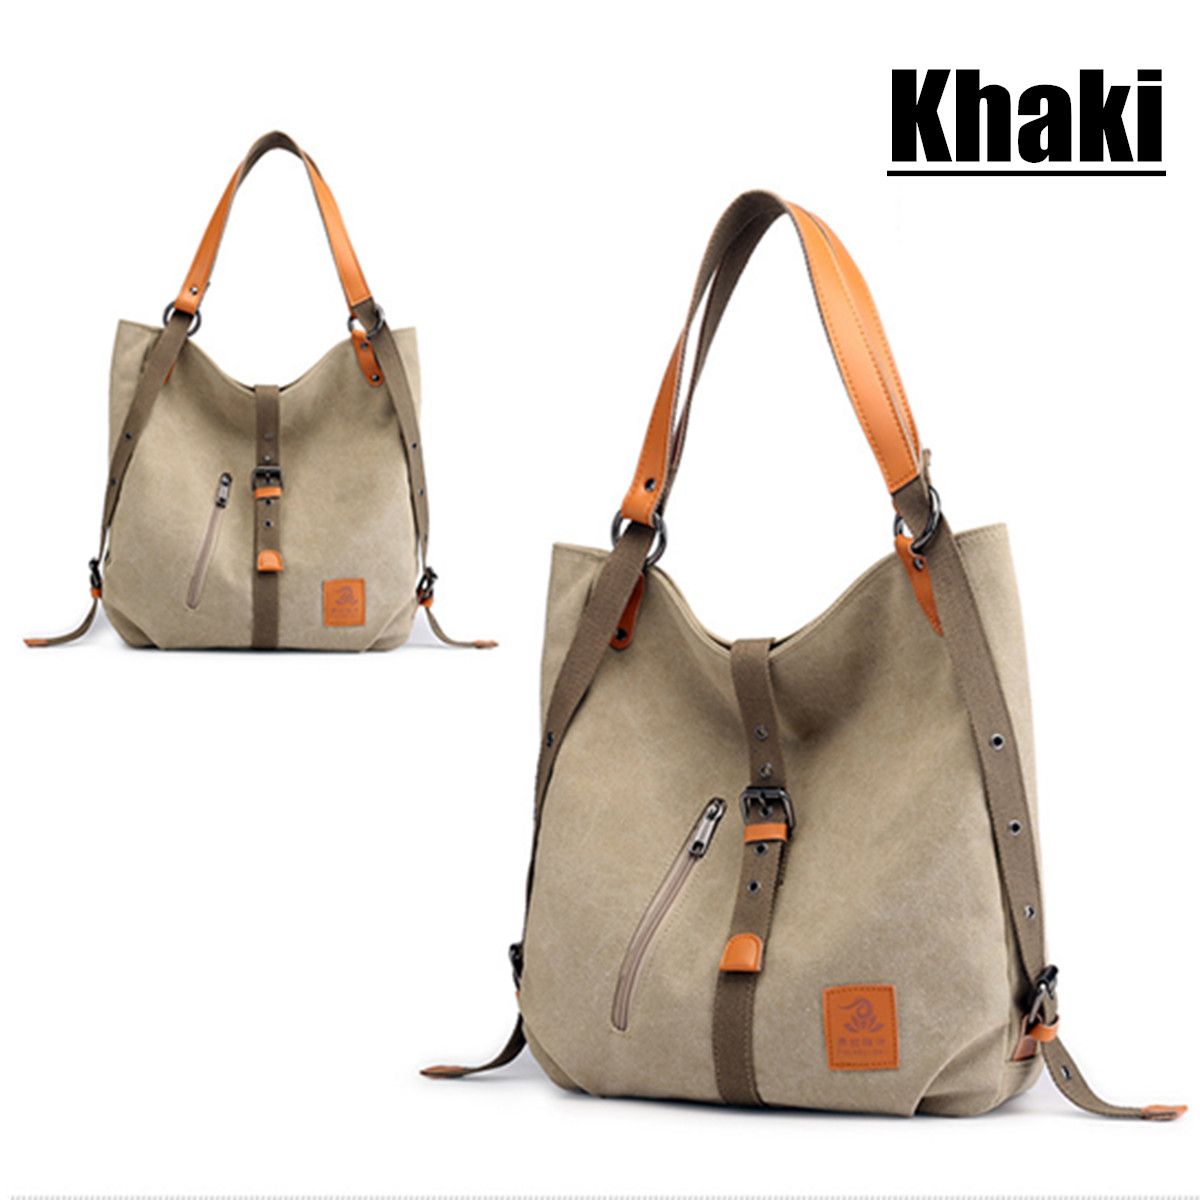 Simple-School-Style-Backpack-Large-Capacity-Travel-Outdoors-Women-Laptop-Bag-1670584